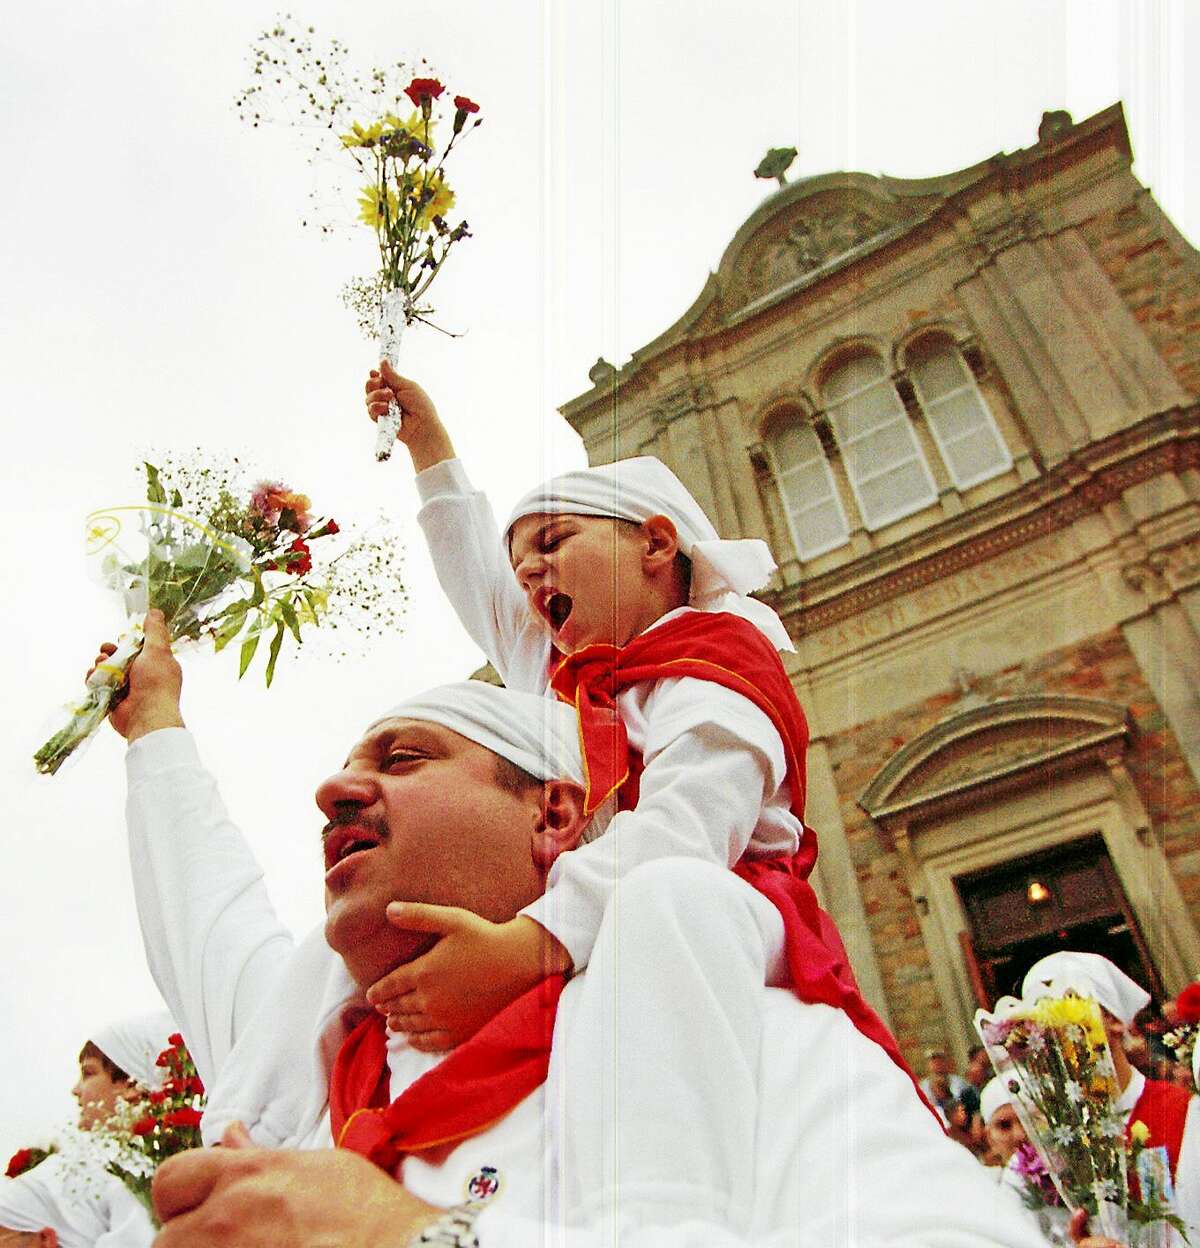 In this 2000 file photograph, Marcus Fazzino rides high on his father Nick’s shoulders as they stream out of St. Sebastian’s Church shouting, “prima diu e sammastianu” during the celebration of the Feast of St. Sebastian.